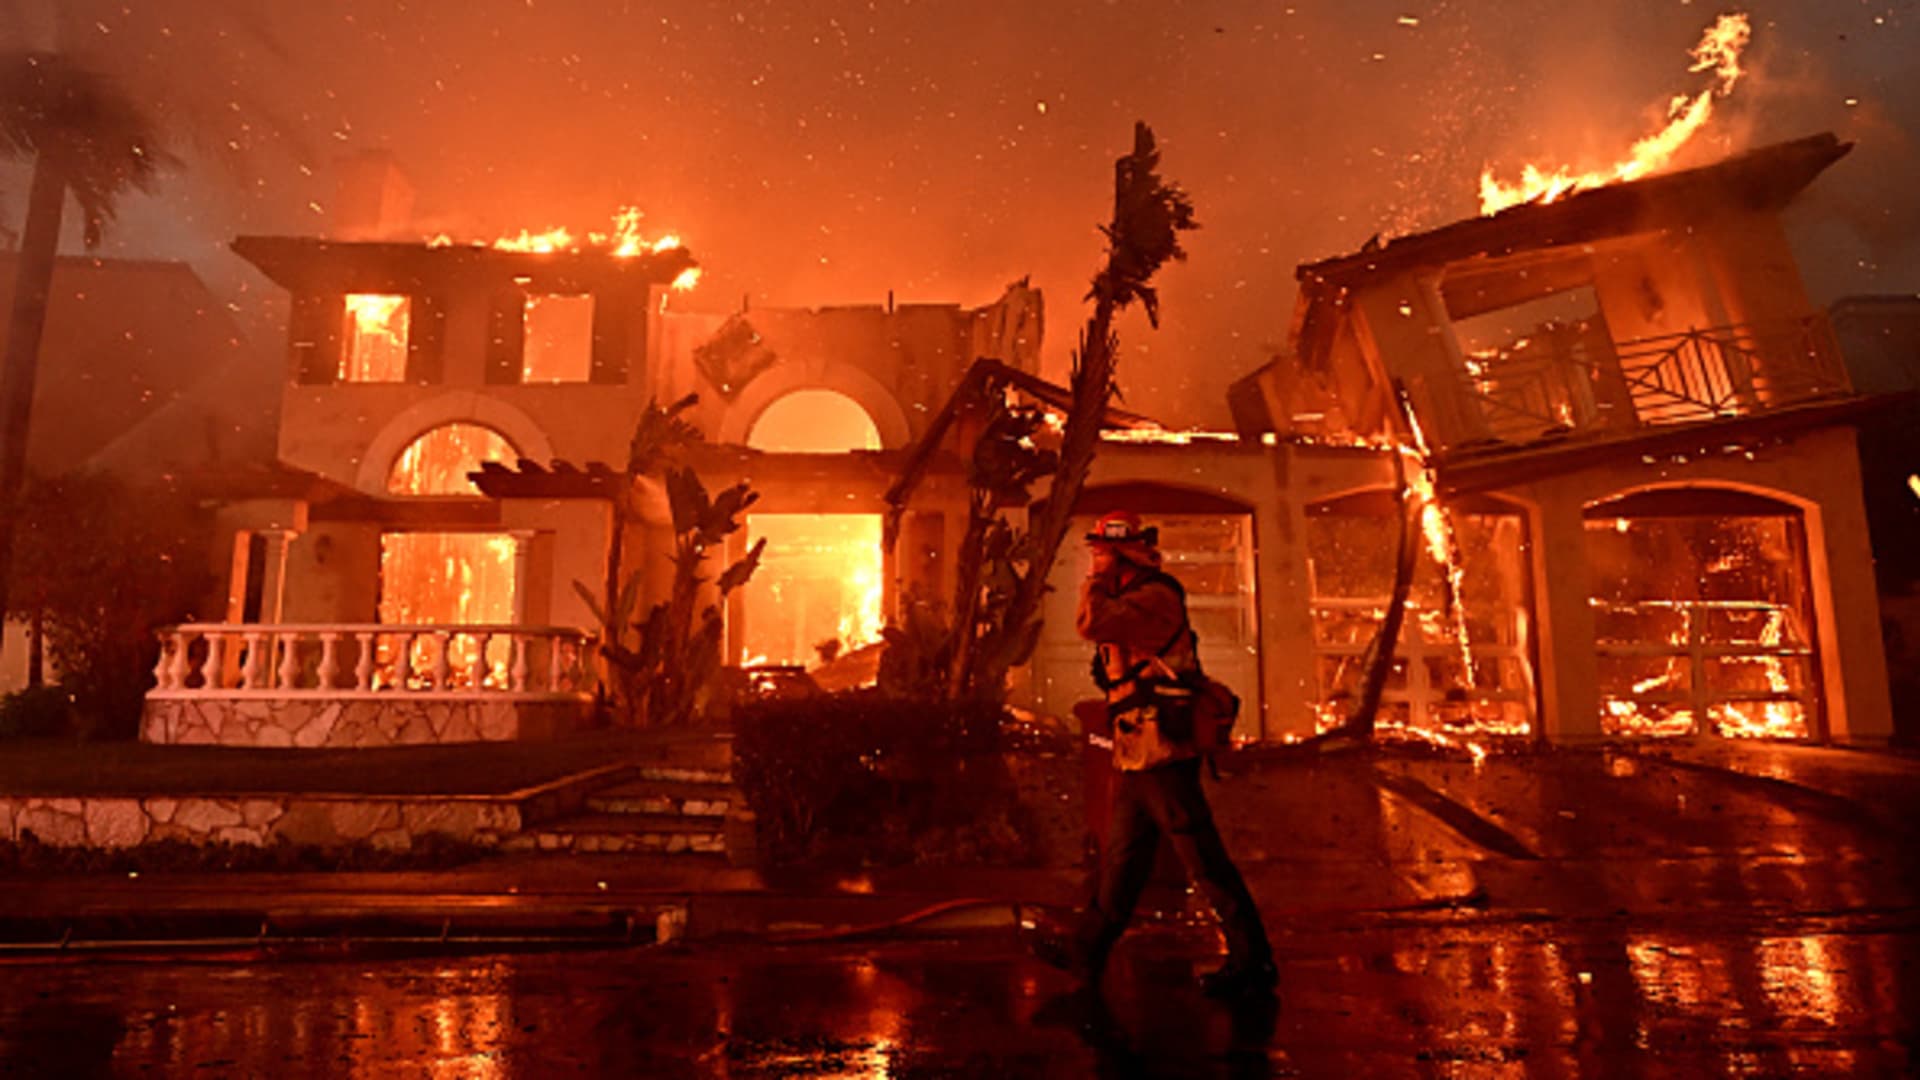 Every home in America now has a wildfire threat score, and some areas see a 200% jump in risk